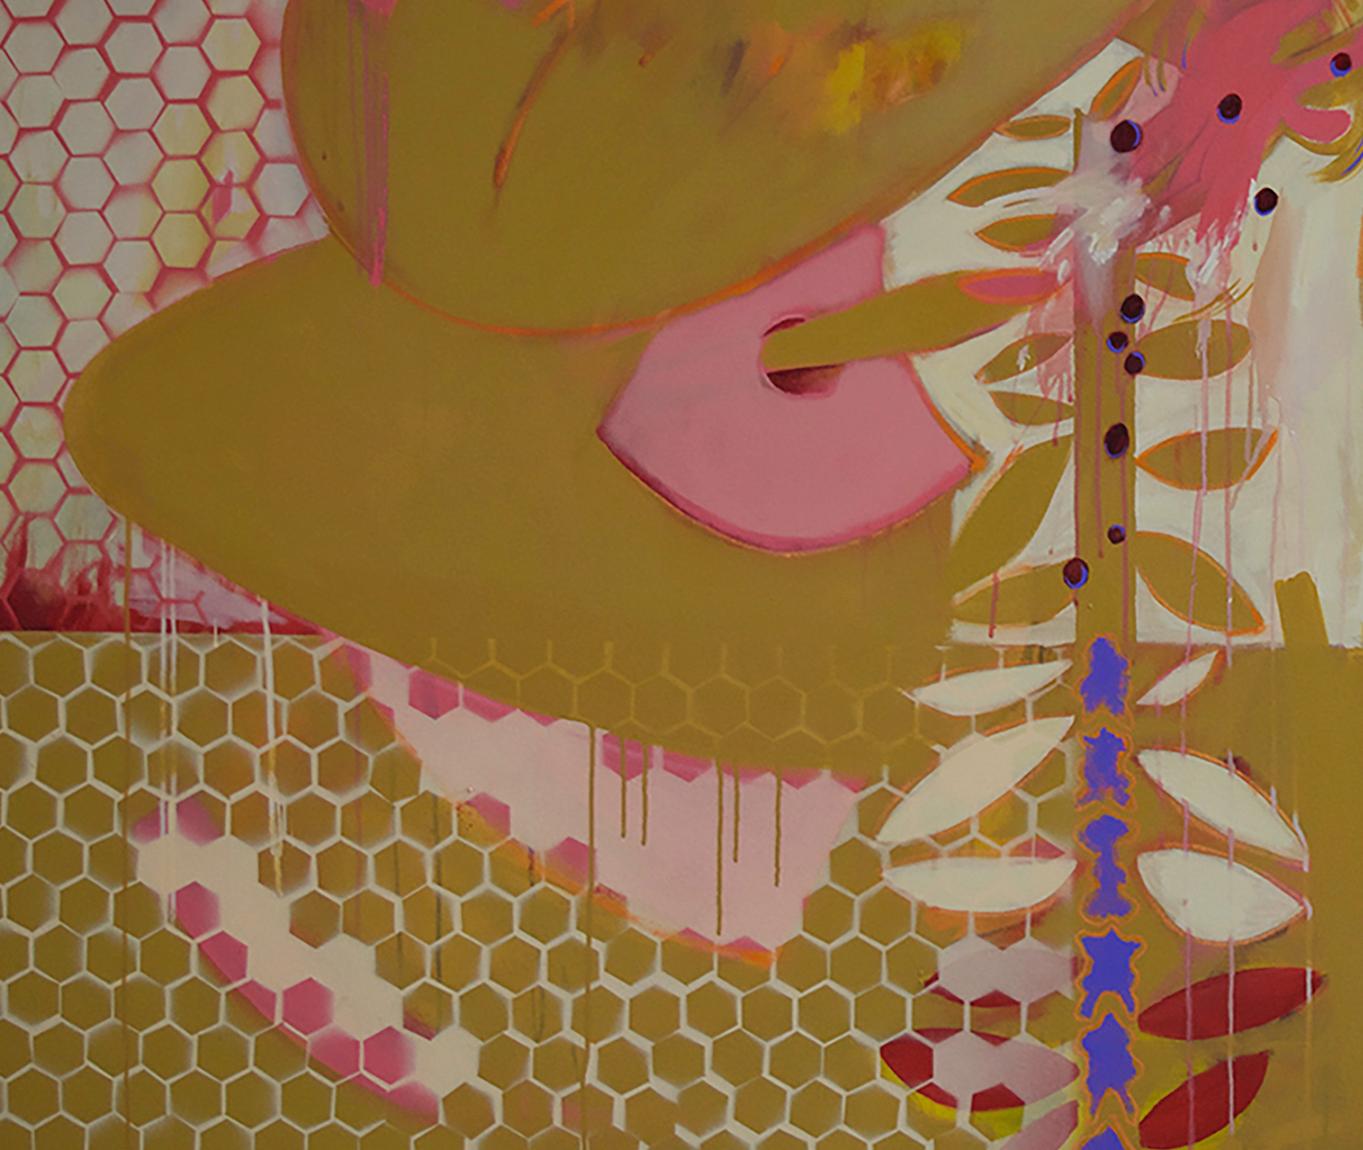 Its still life 7 - Abstract, Mustard, Pink, white, Honeycomb shapes - Painting by Paul Thomas